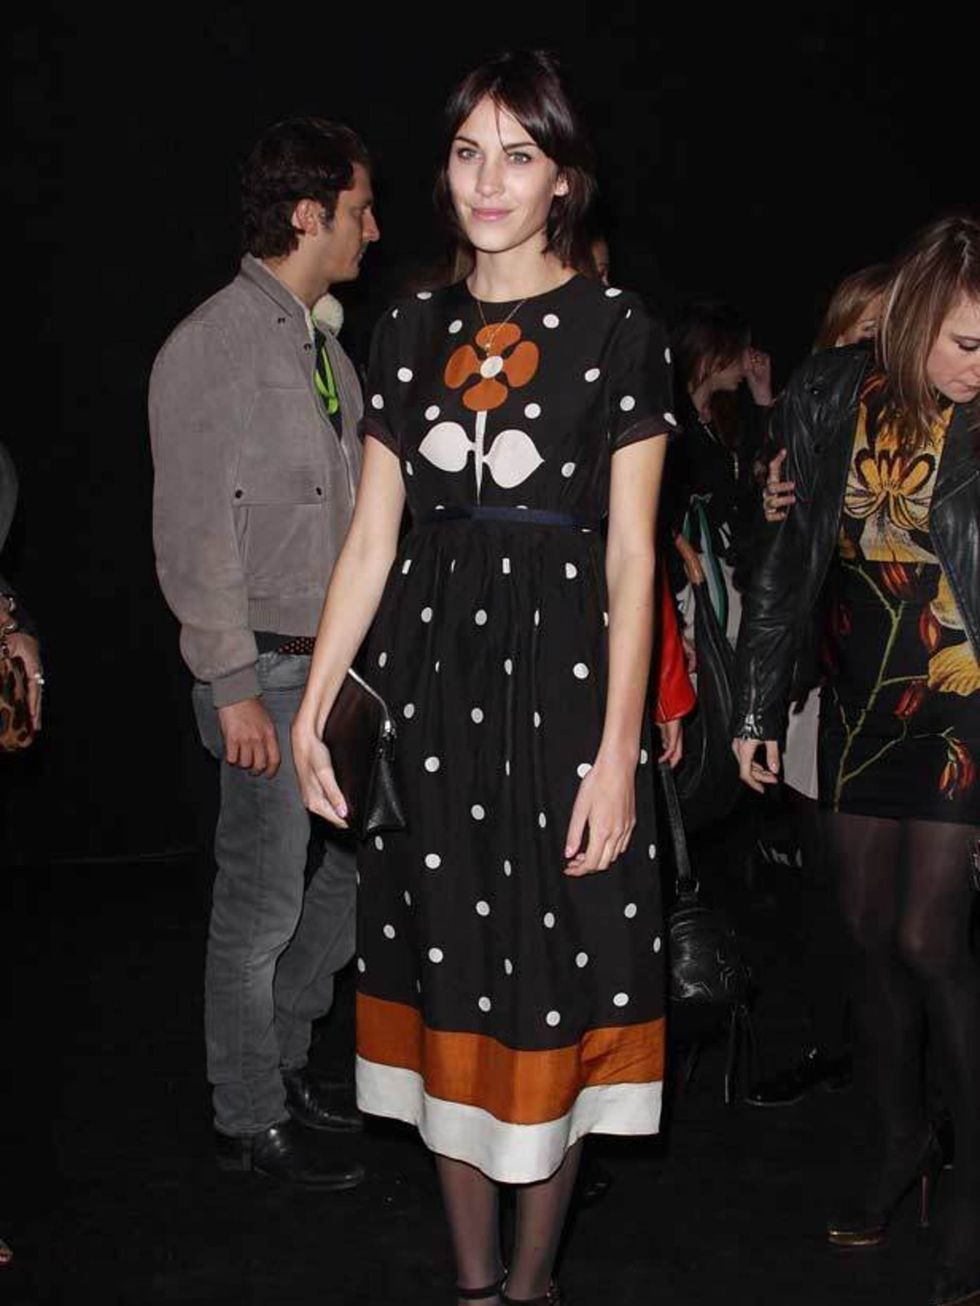 <p><a href="http://www.elleuk.com/starstyle/style-files/%28section%29/Alexa-Chung">Alexa Chung</a> at the Etam Spring/Summer 2011 collection launch at Grand Palais in Paris, 24 January 2011</p>